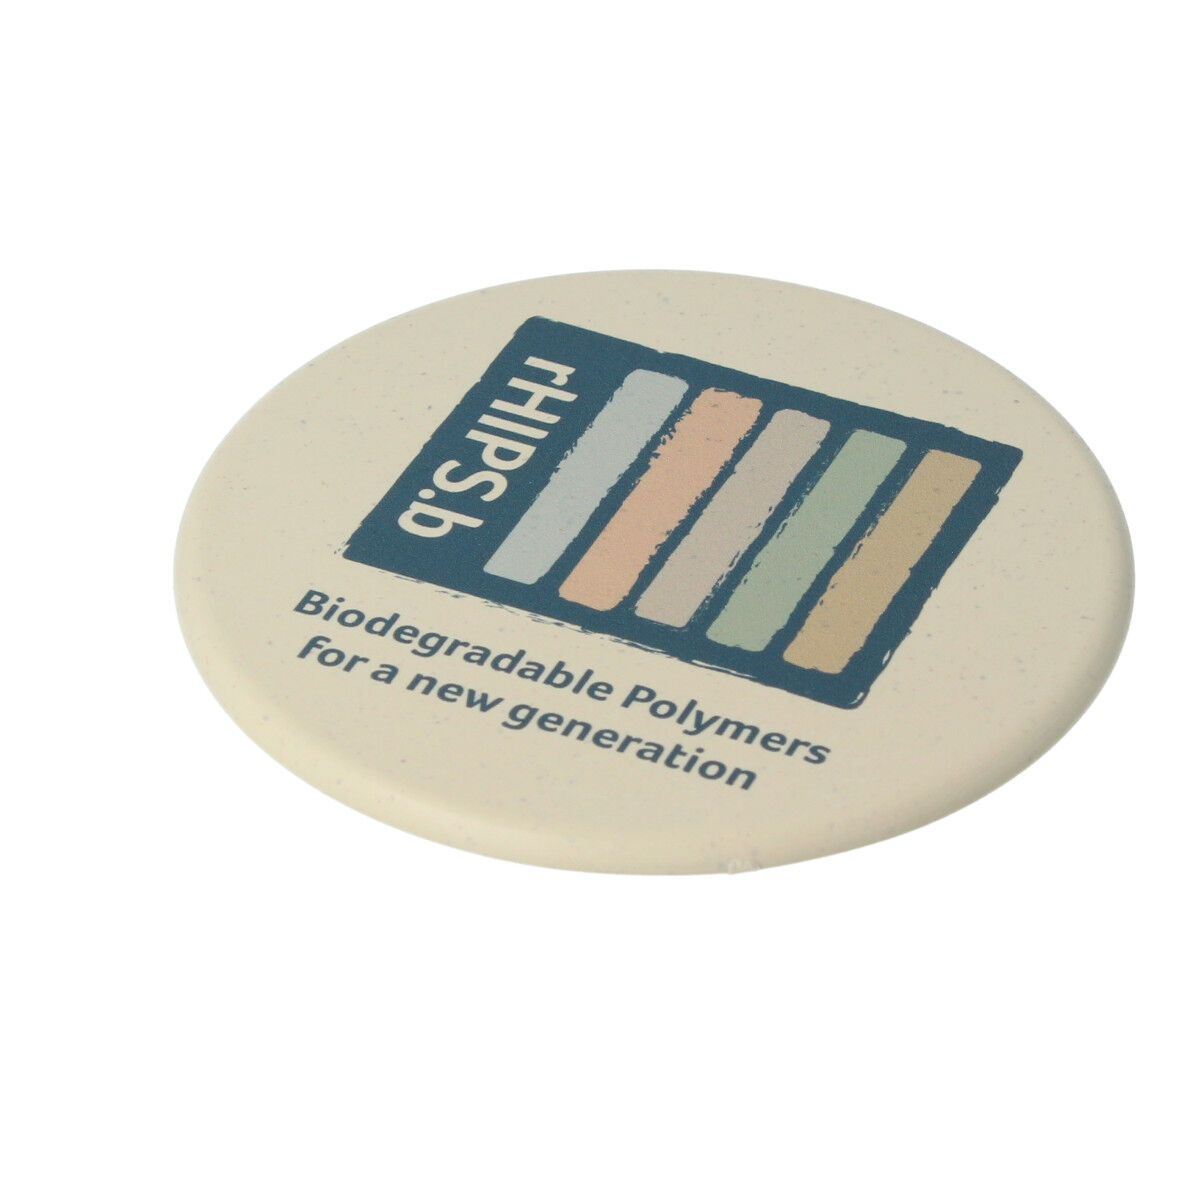 Recycled rHIPS Coaster (sand colour with sample branding)